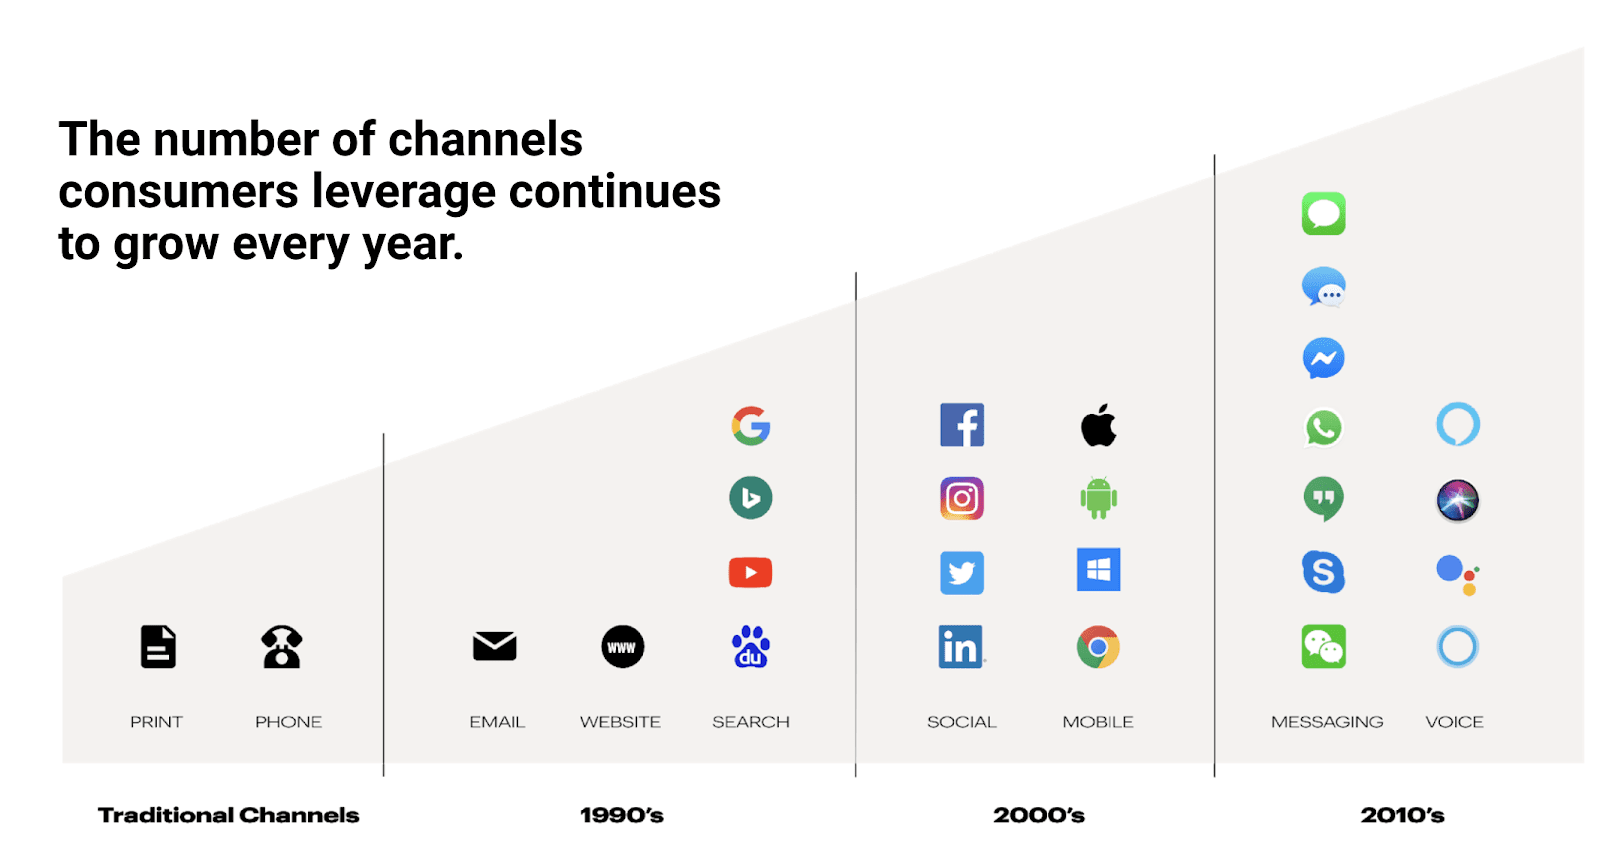 Number of channels used by consumers each decade